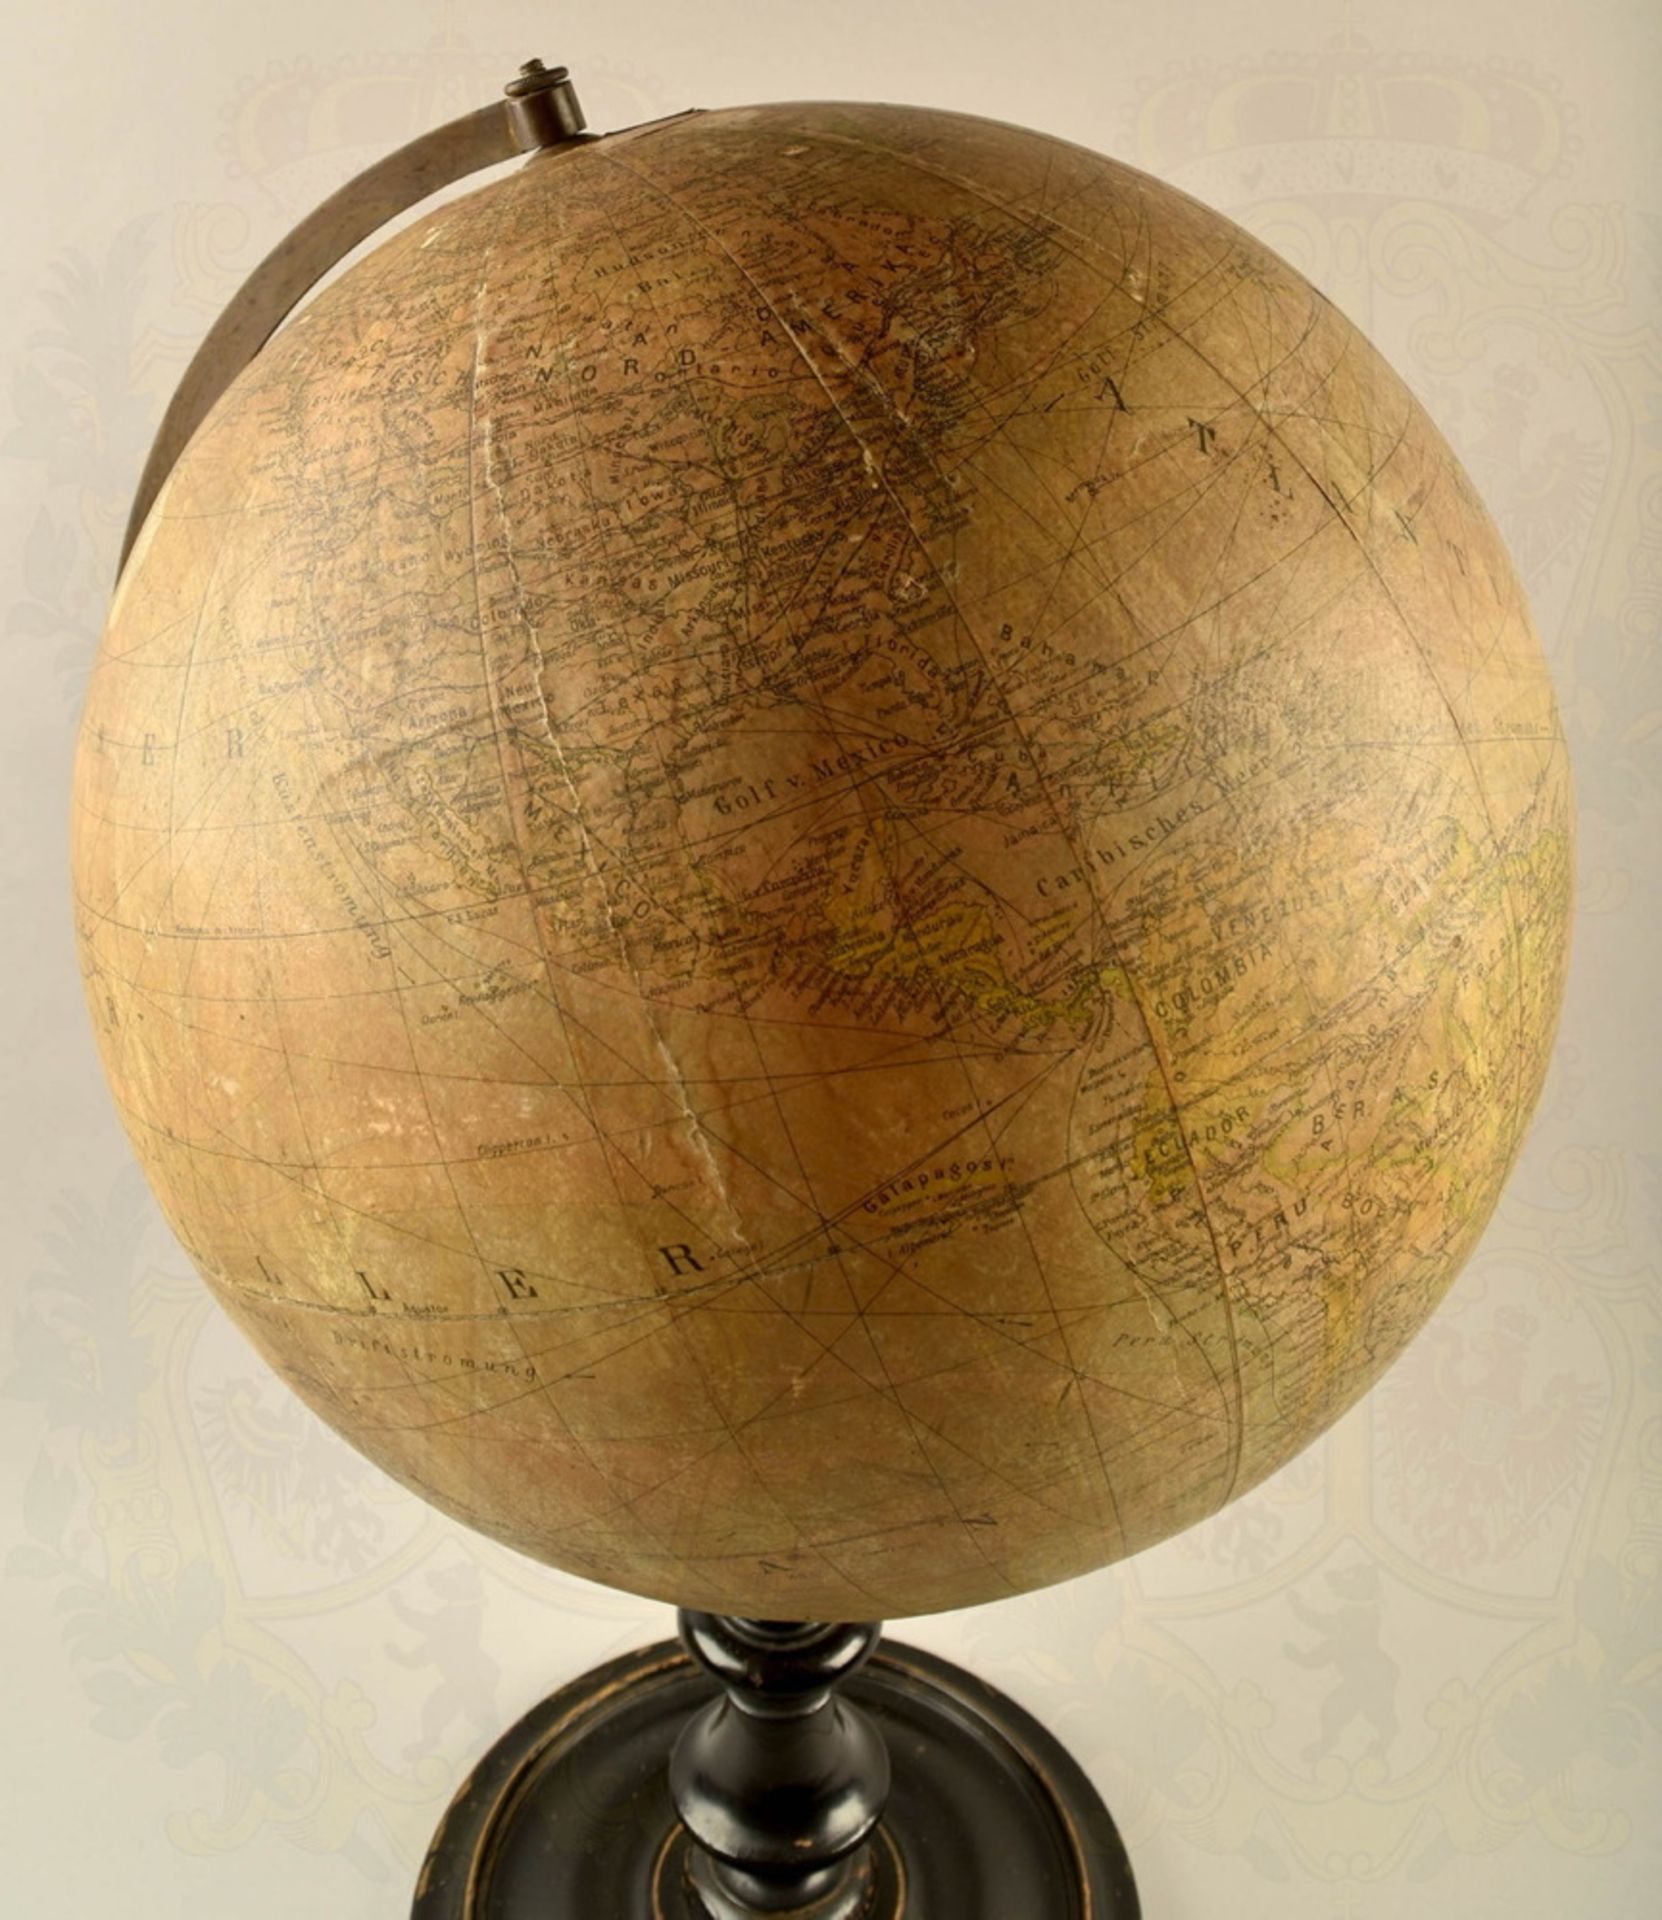 German terrestial globe made about 1912 - Image 2 of 2